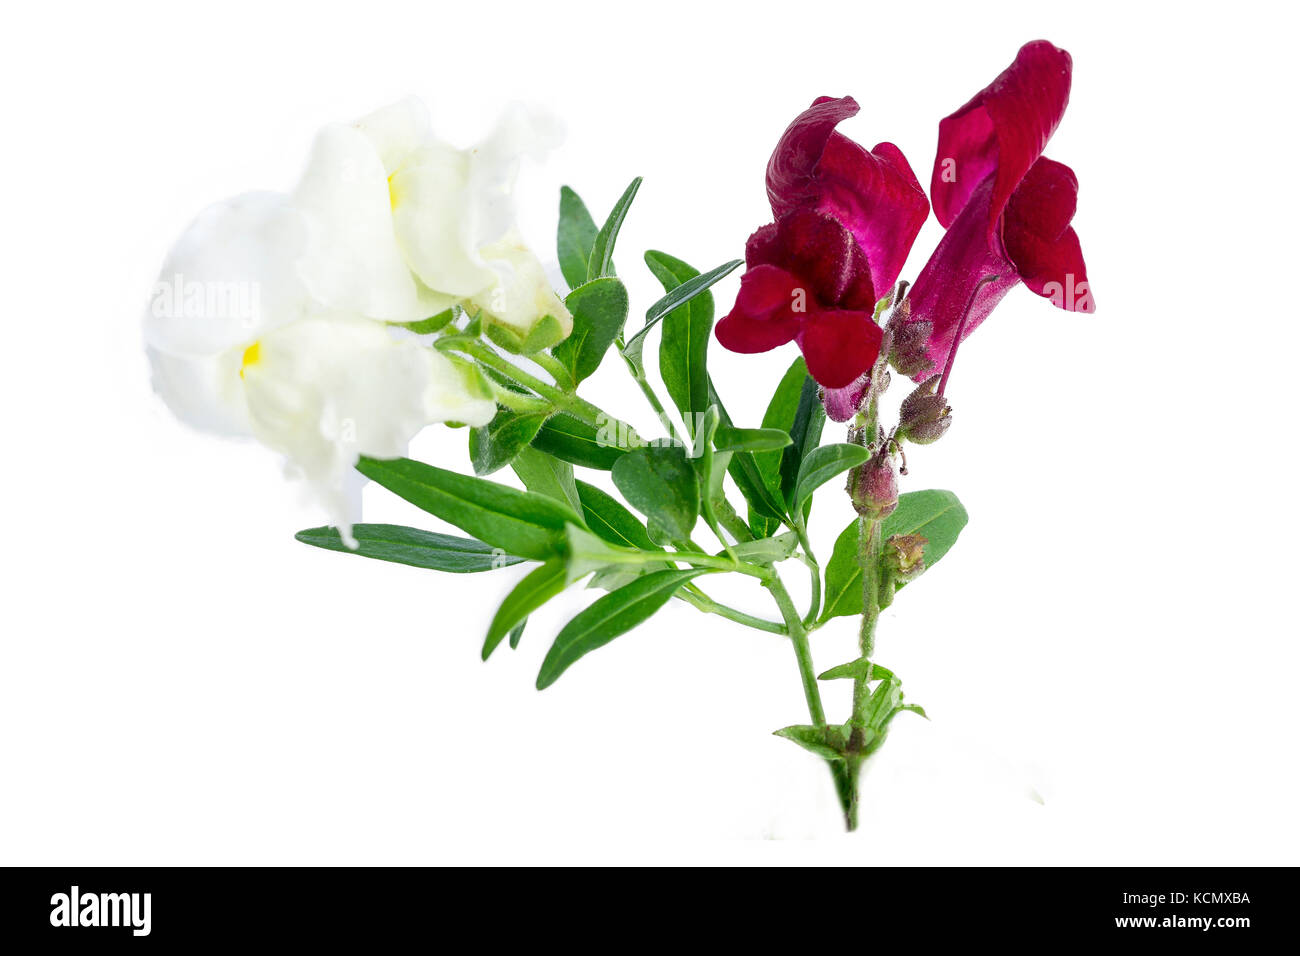 Isolated flower of purple and white matthiola on blanch background Stock Photo